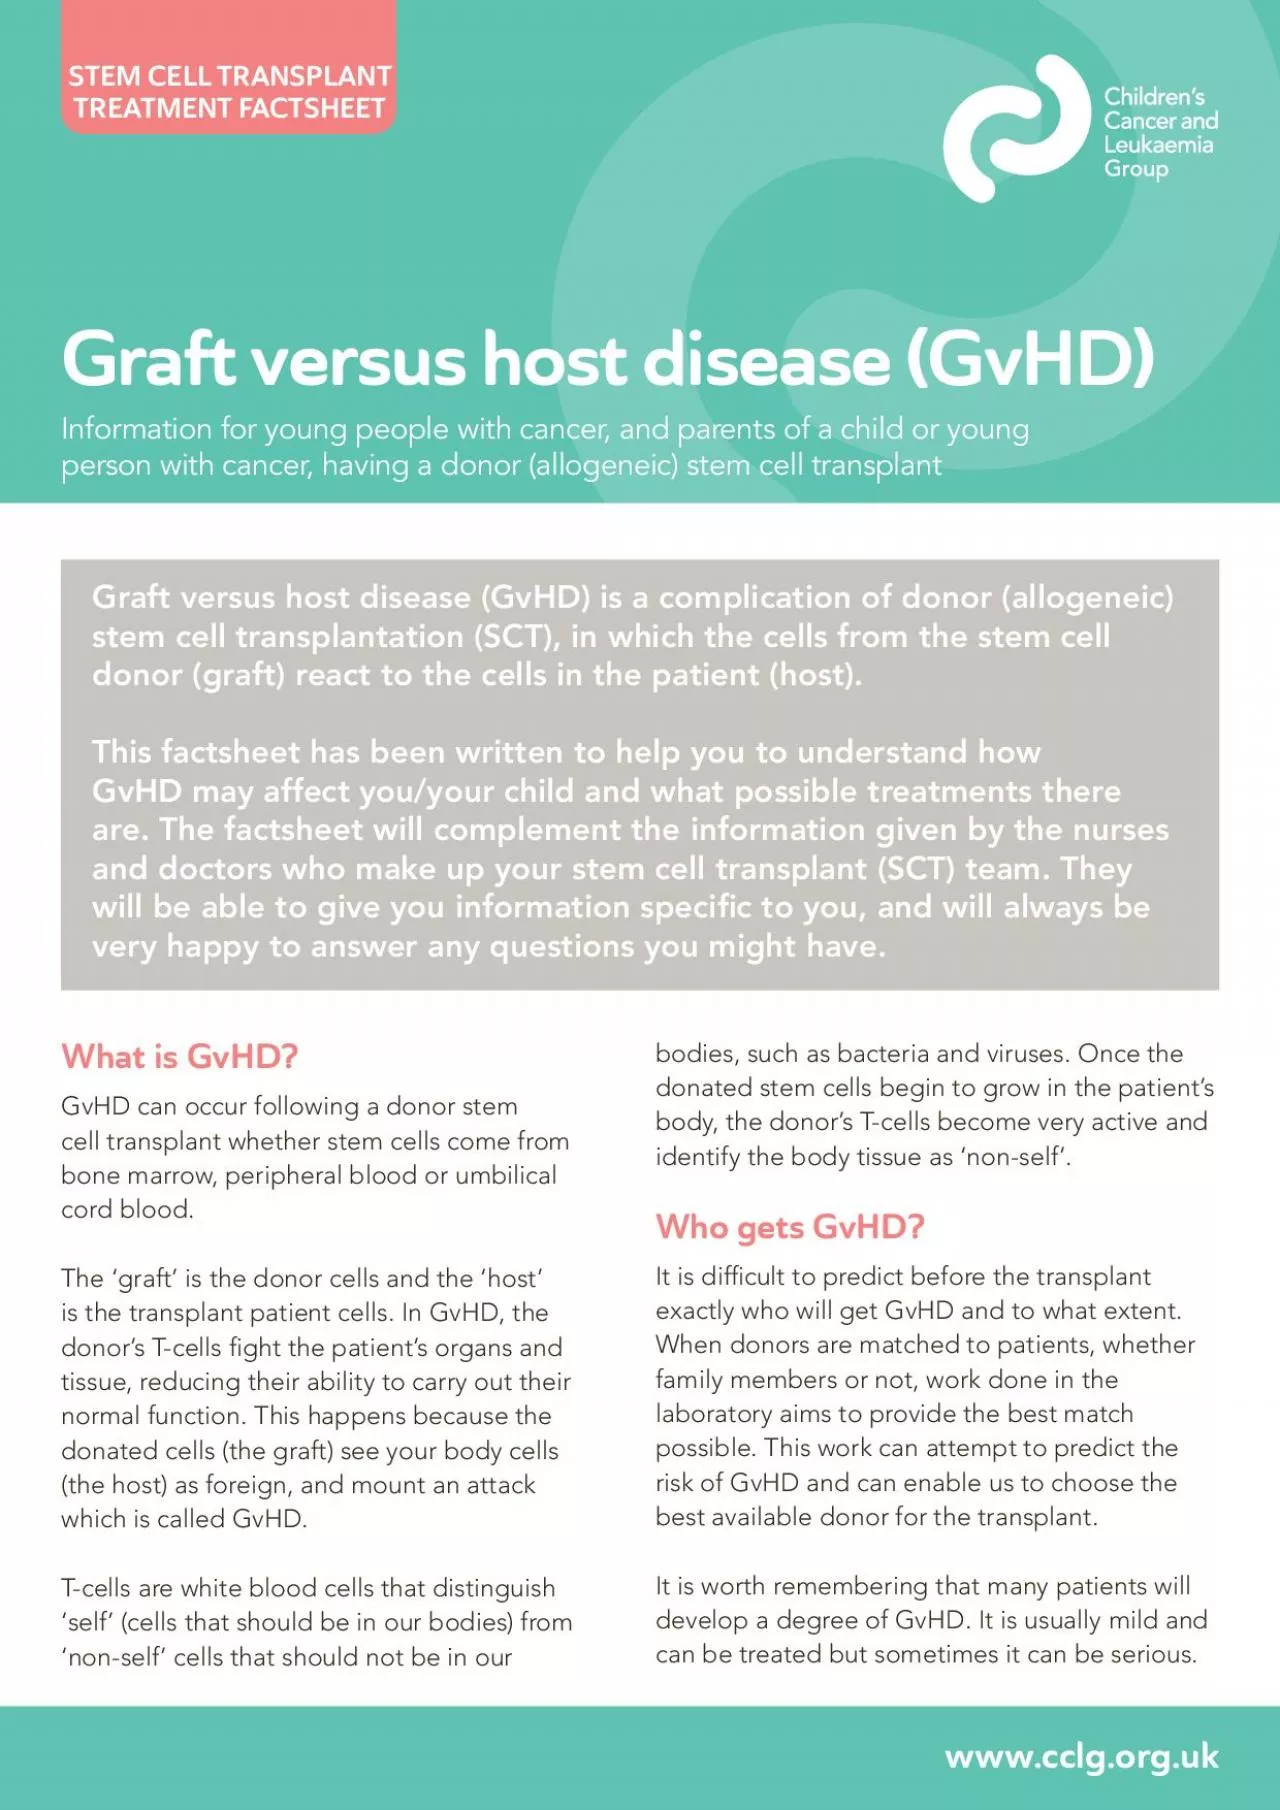 What is GvHD cell transplant whether stem cells come from bone marrow